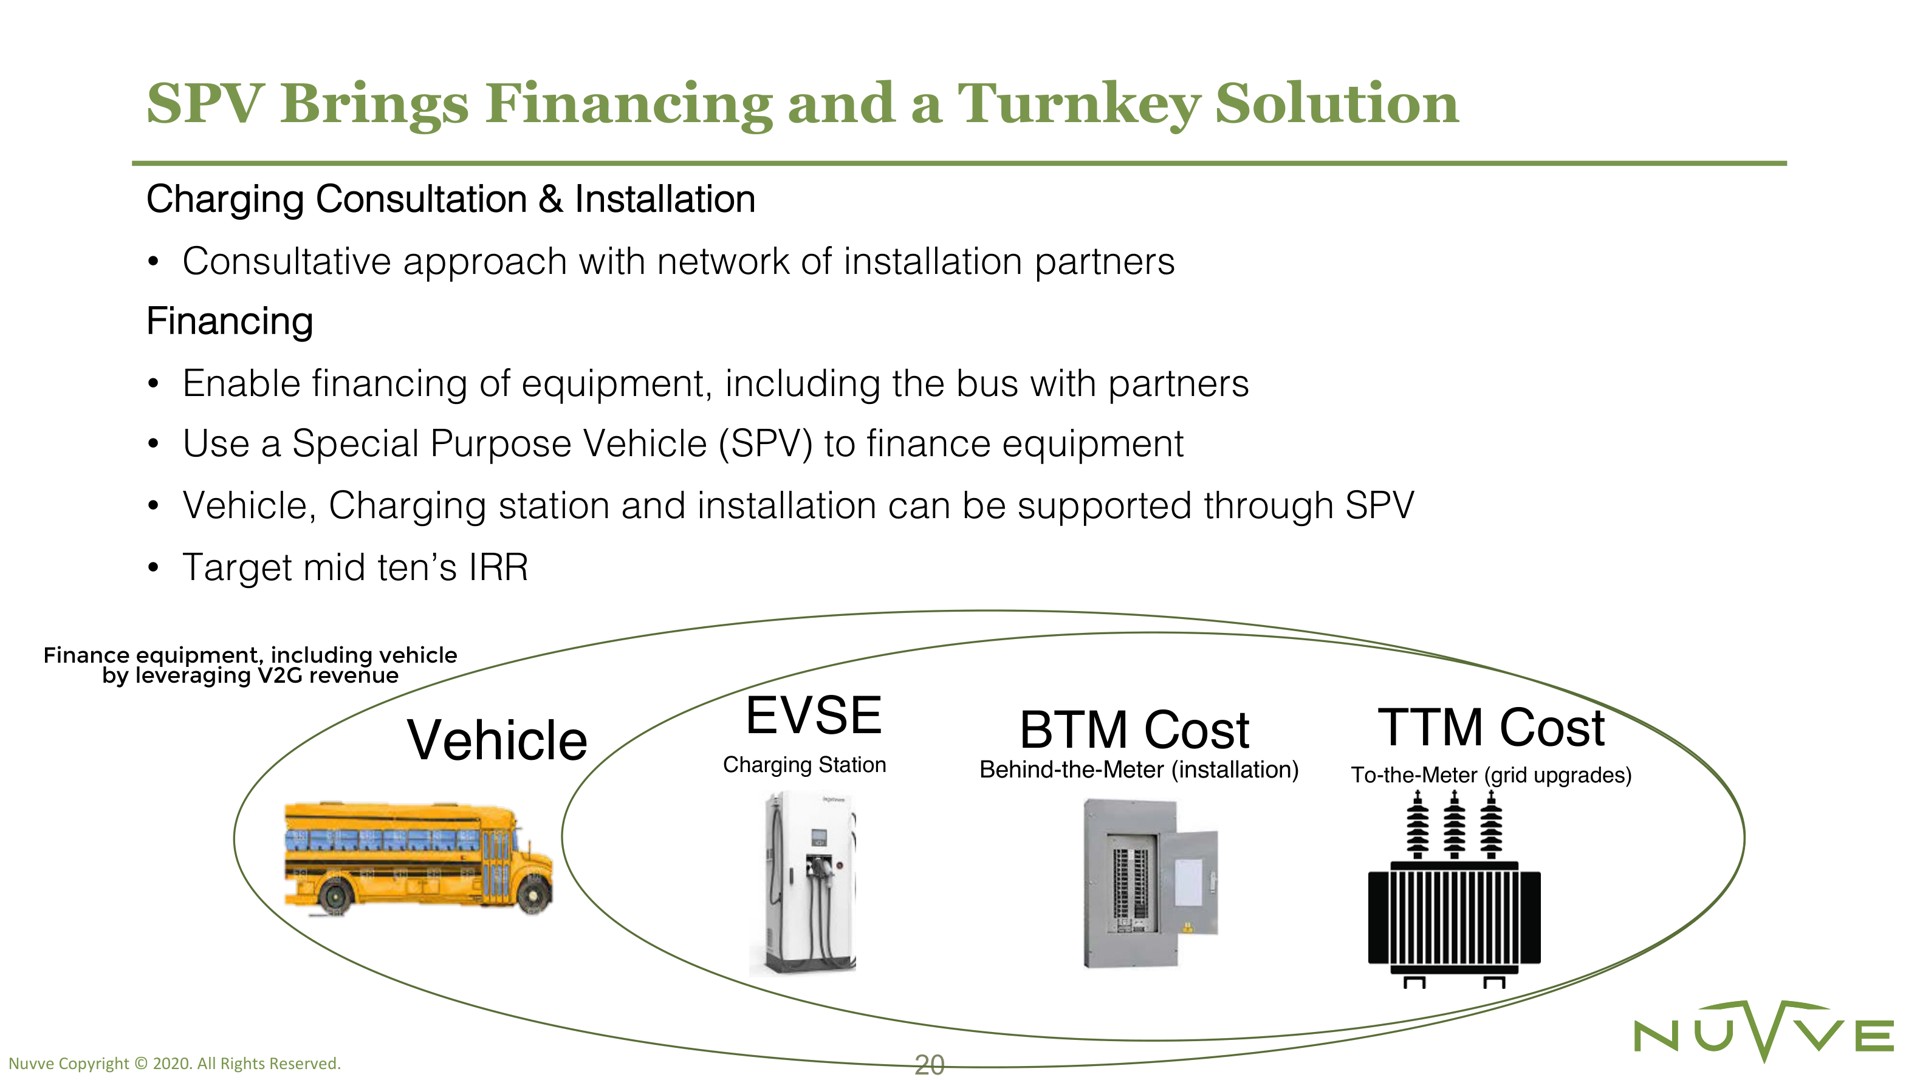 brings financing and a turnkey solution vehicle cost cost | Nuvve